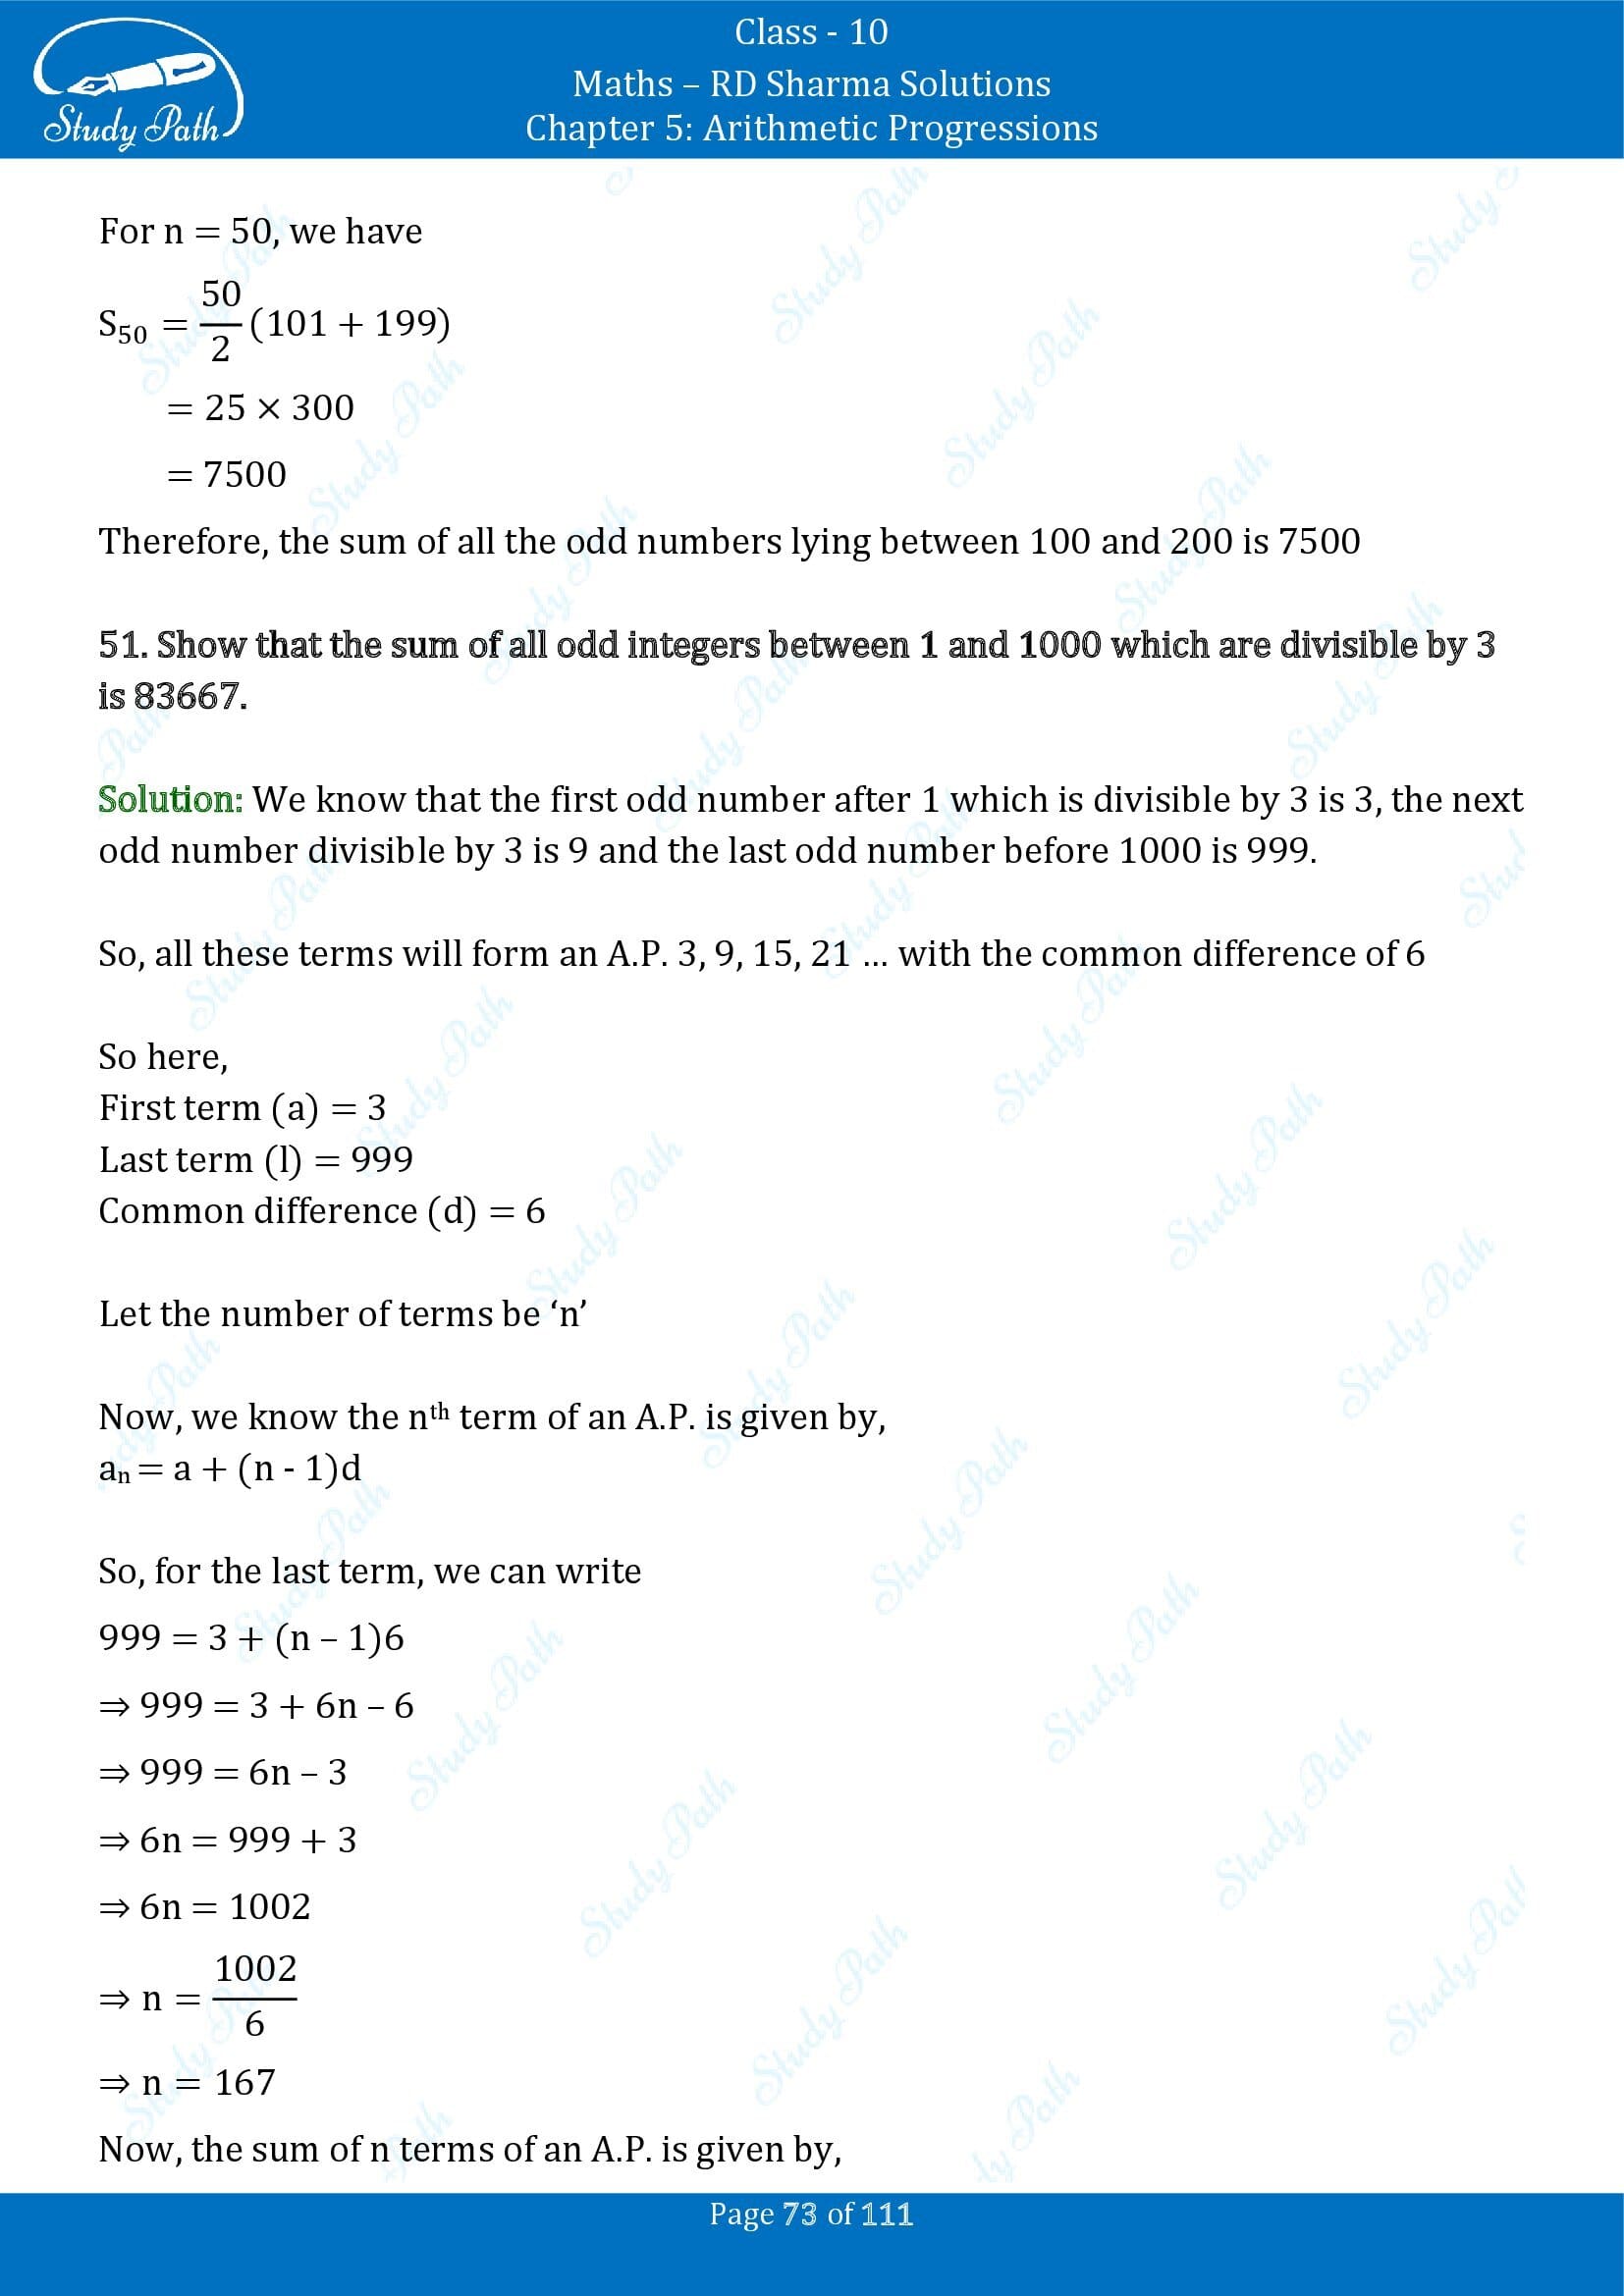 RD Sharma Solutions Class 10 Chapter 5 Arithmetic Progressions Exercise 5.6 00073